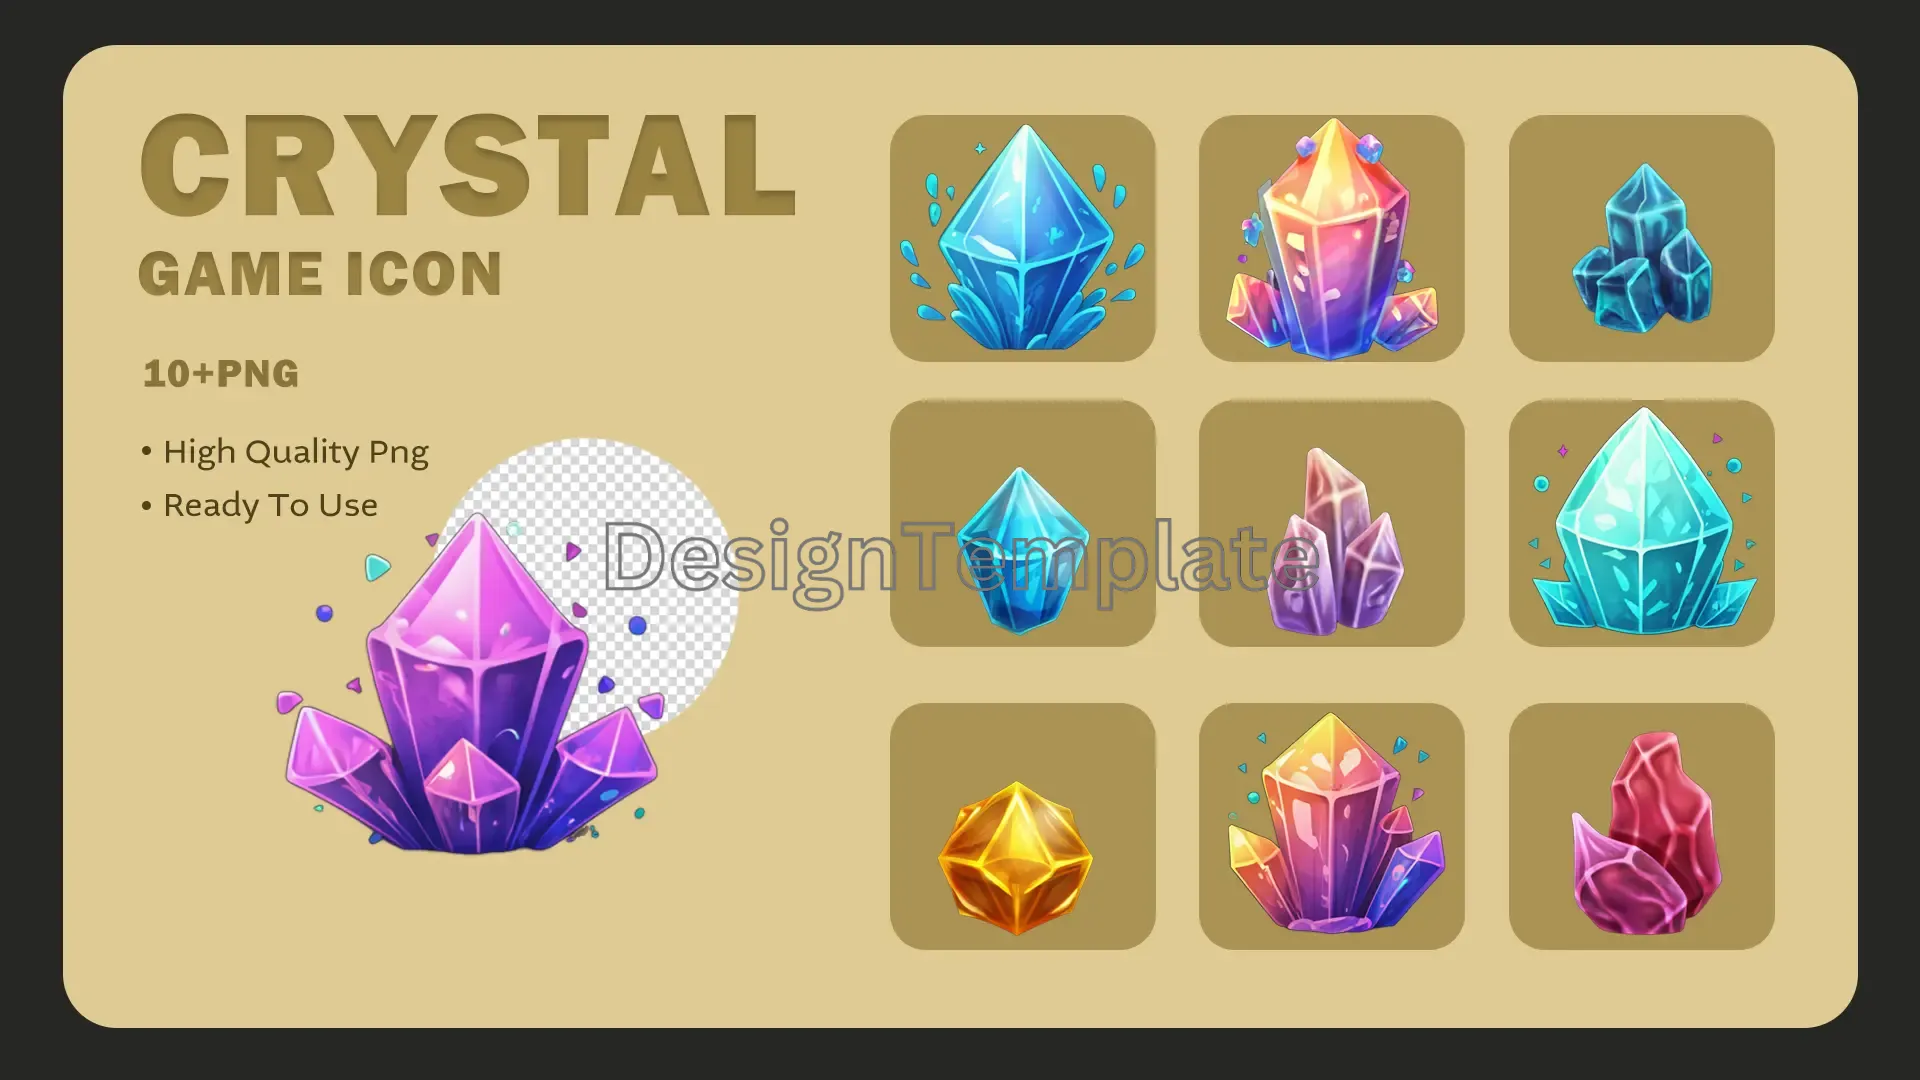 Royal Crystals Regal 3D Game Icons Collection